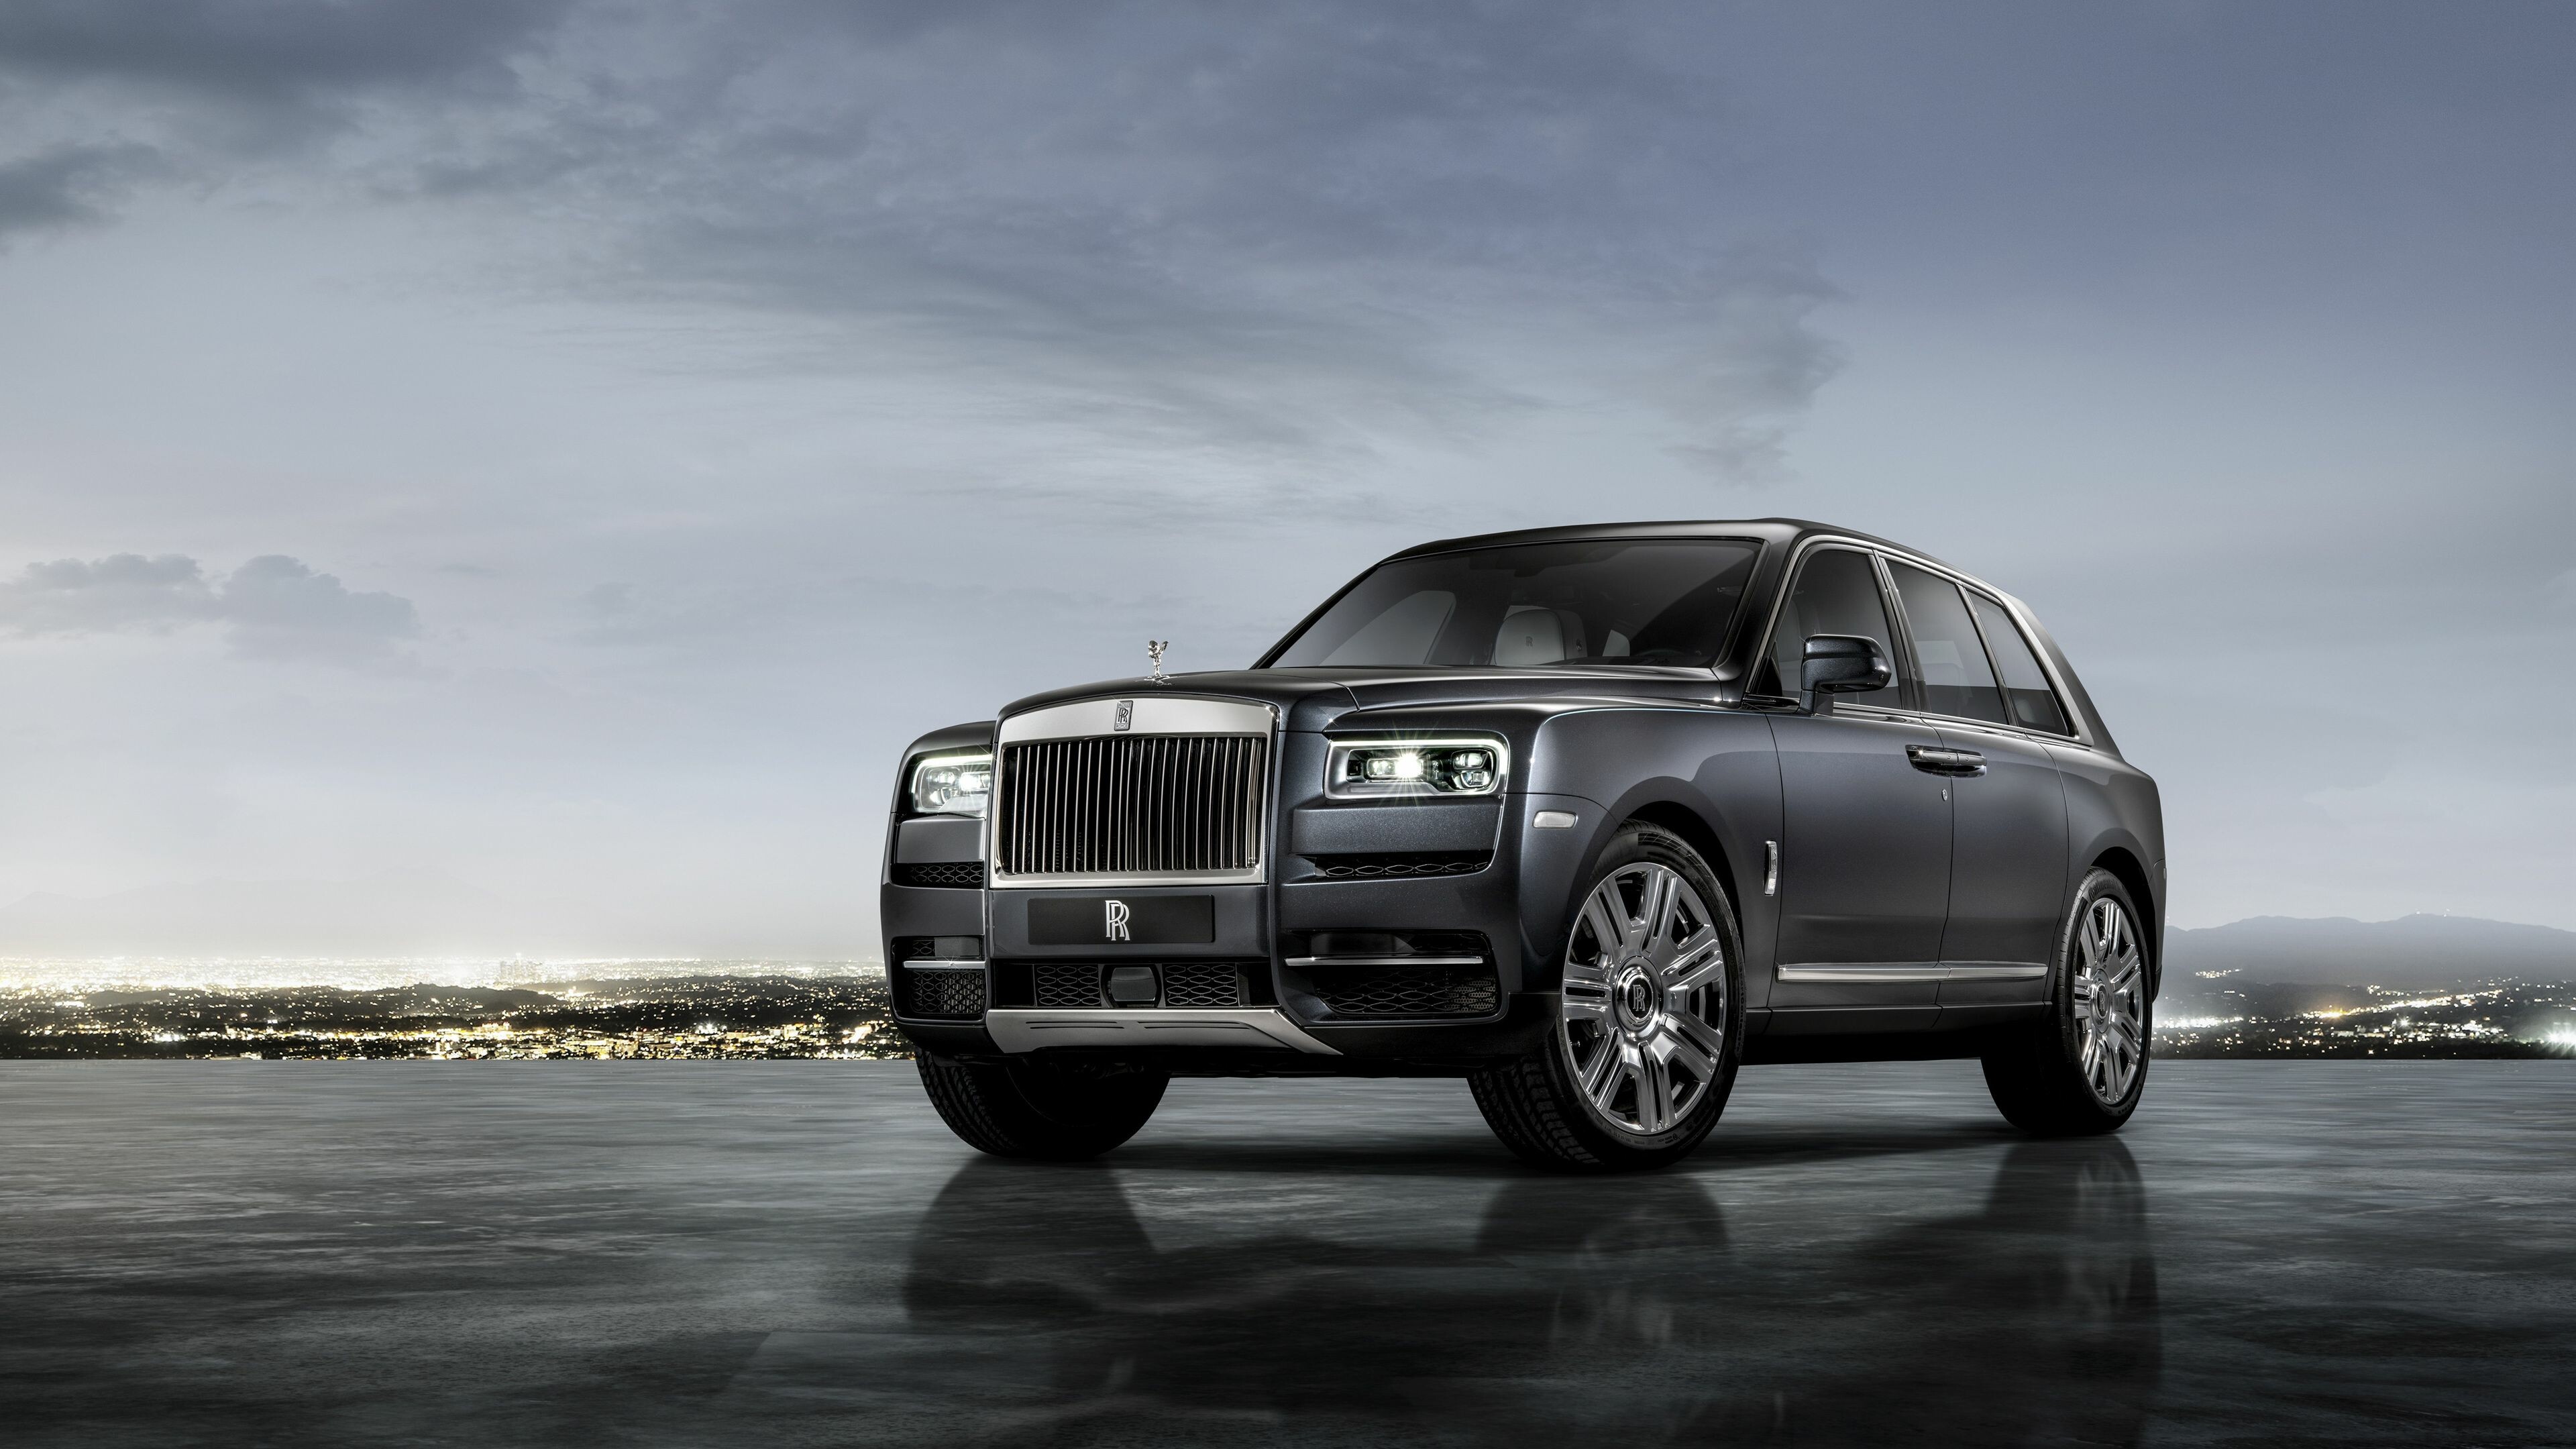 Rolls-Royce: Model Cullinan, The brand's first all-wheel drive vehicle. 3840x2160 4K Background.